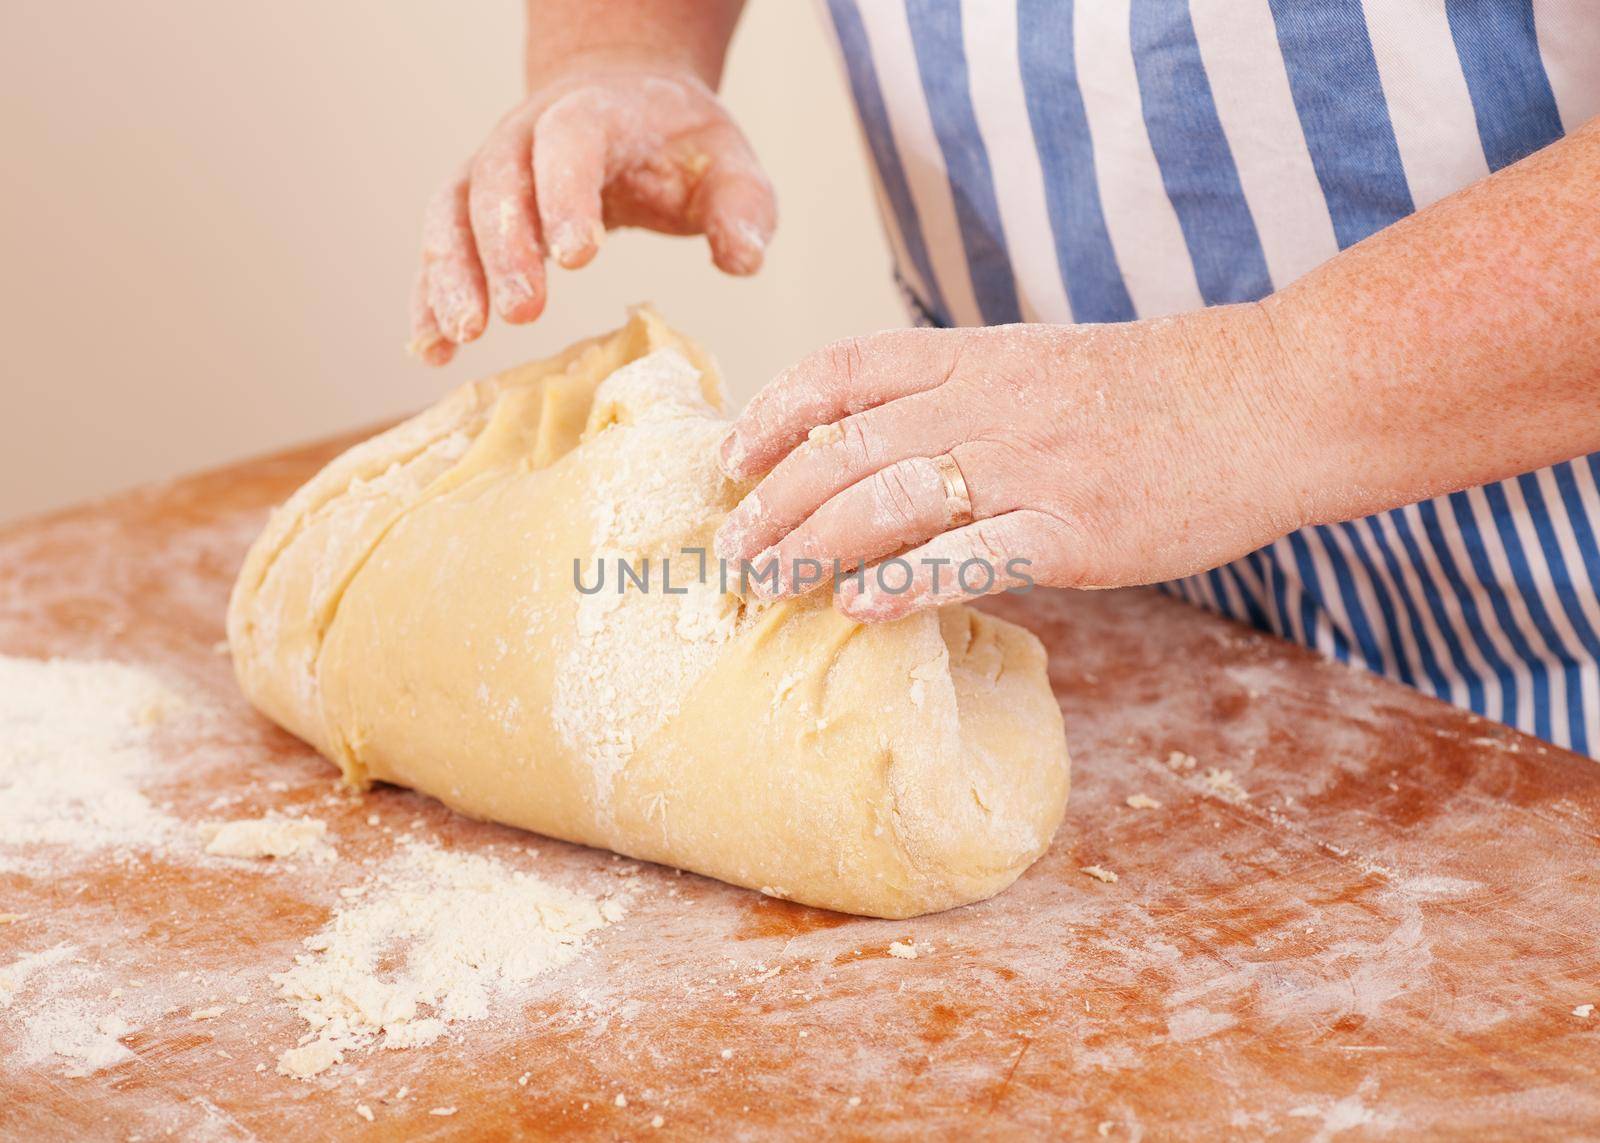 Baking biscuits, woman kneading the dough